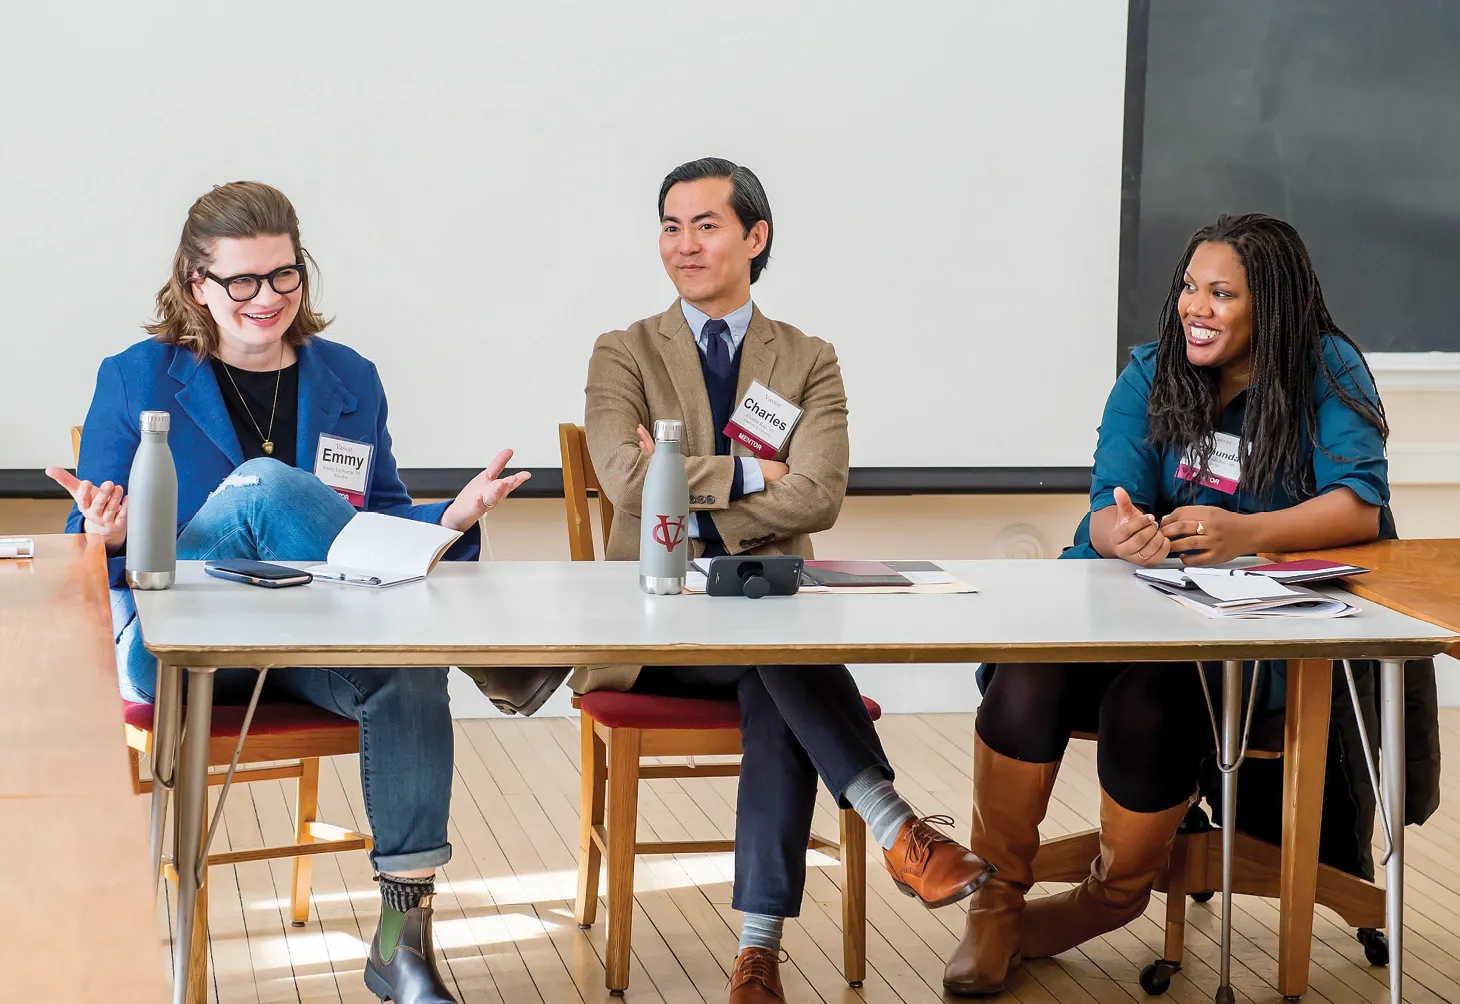 Three alums, including Charles Kim, class of 92, and Joshunda Sanders, class of 2000, at a table during a panel at Sophomore Career Connections.